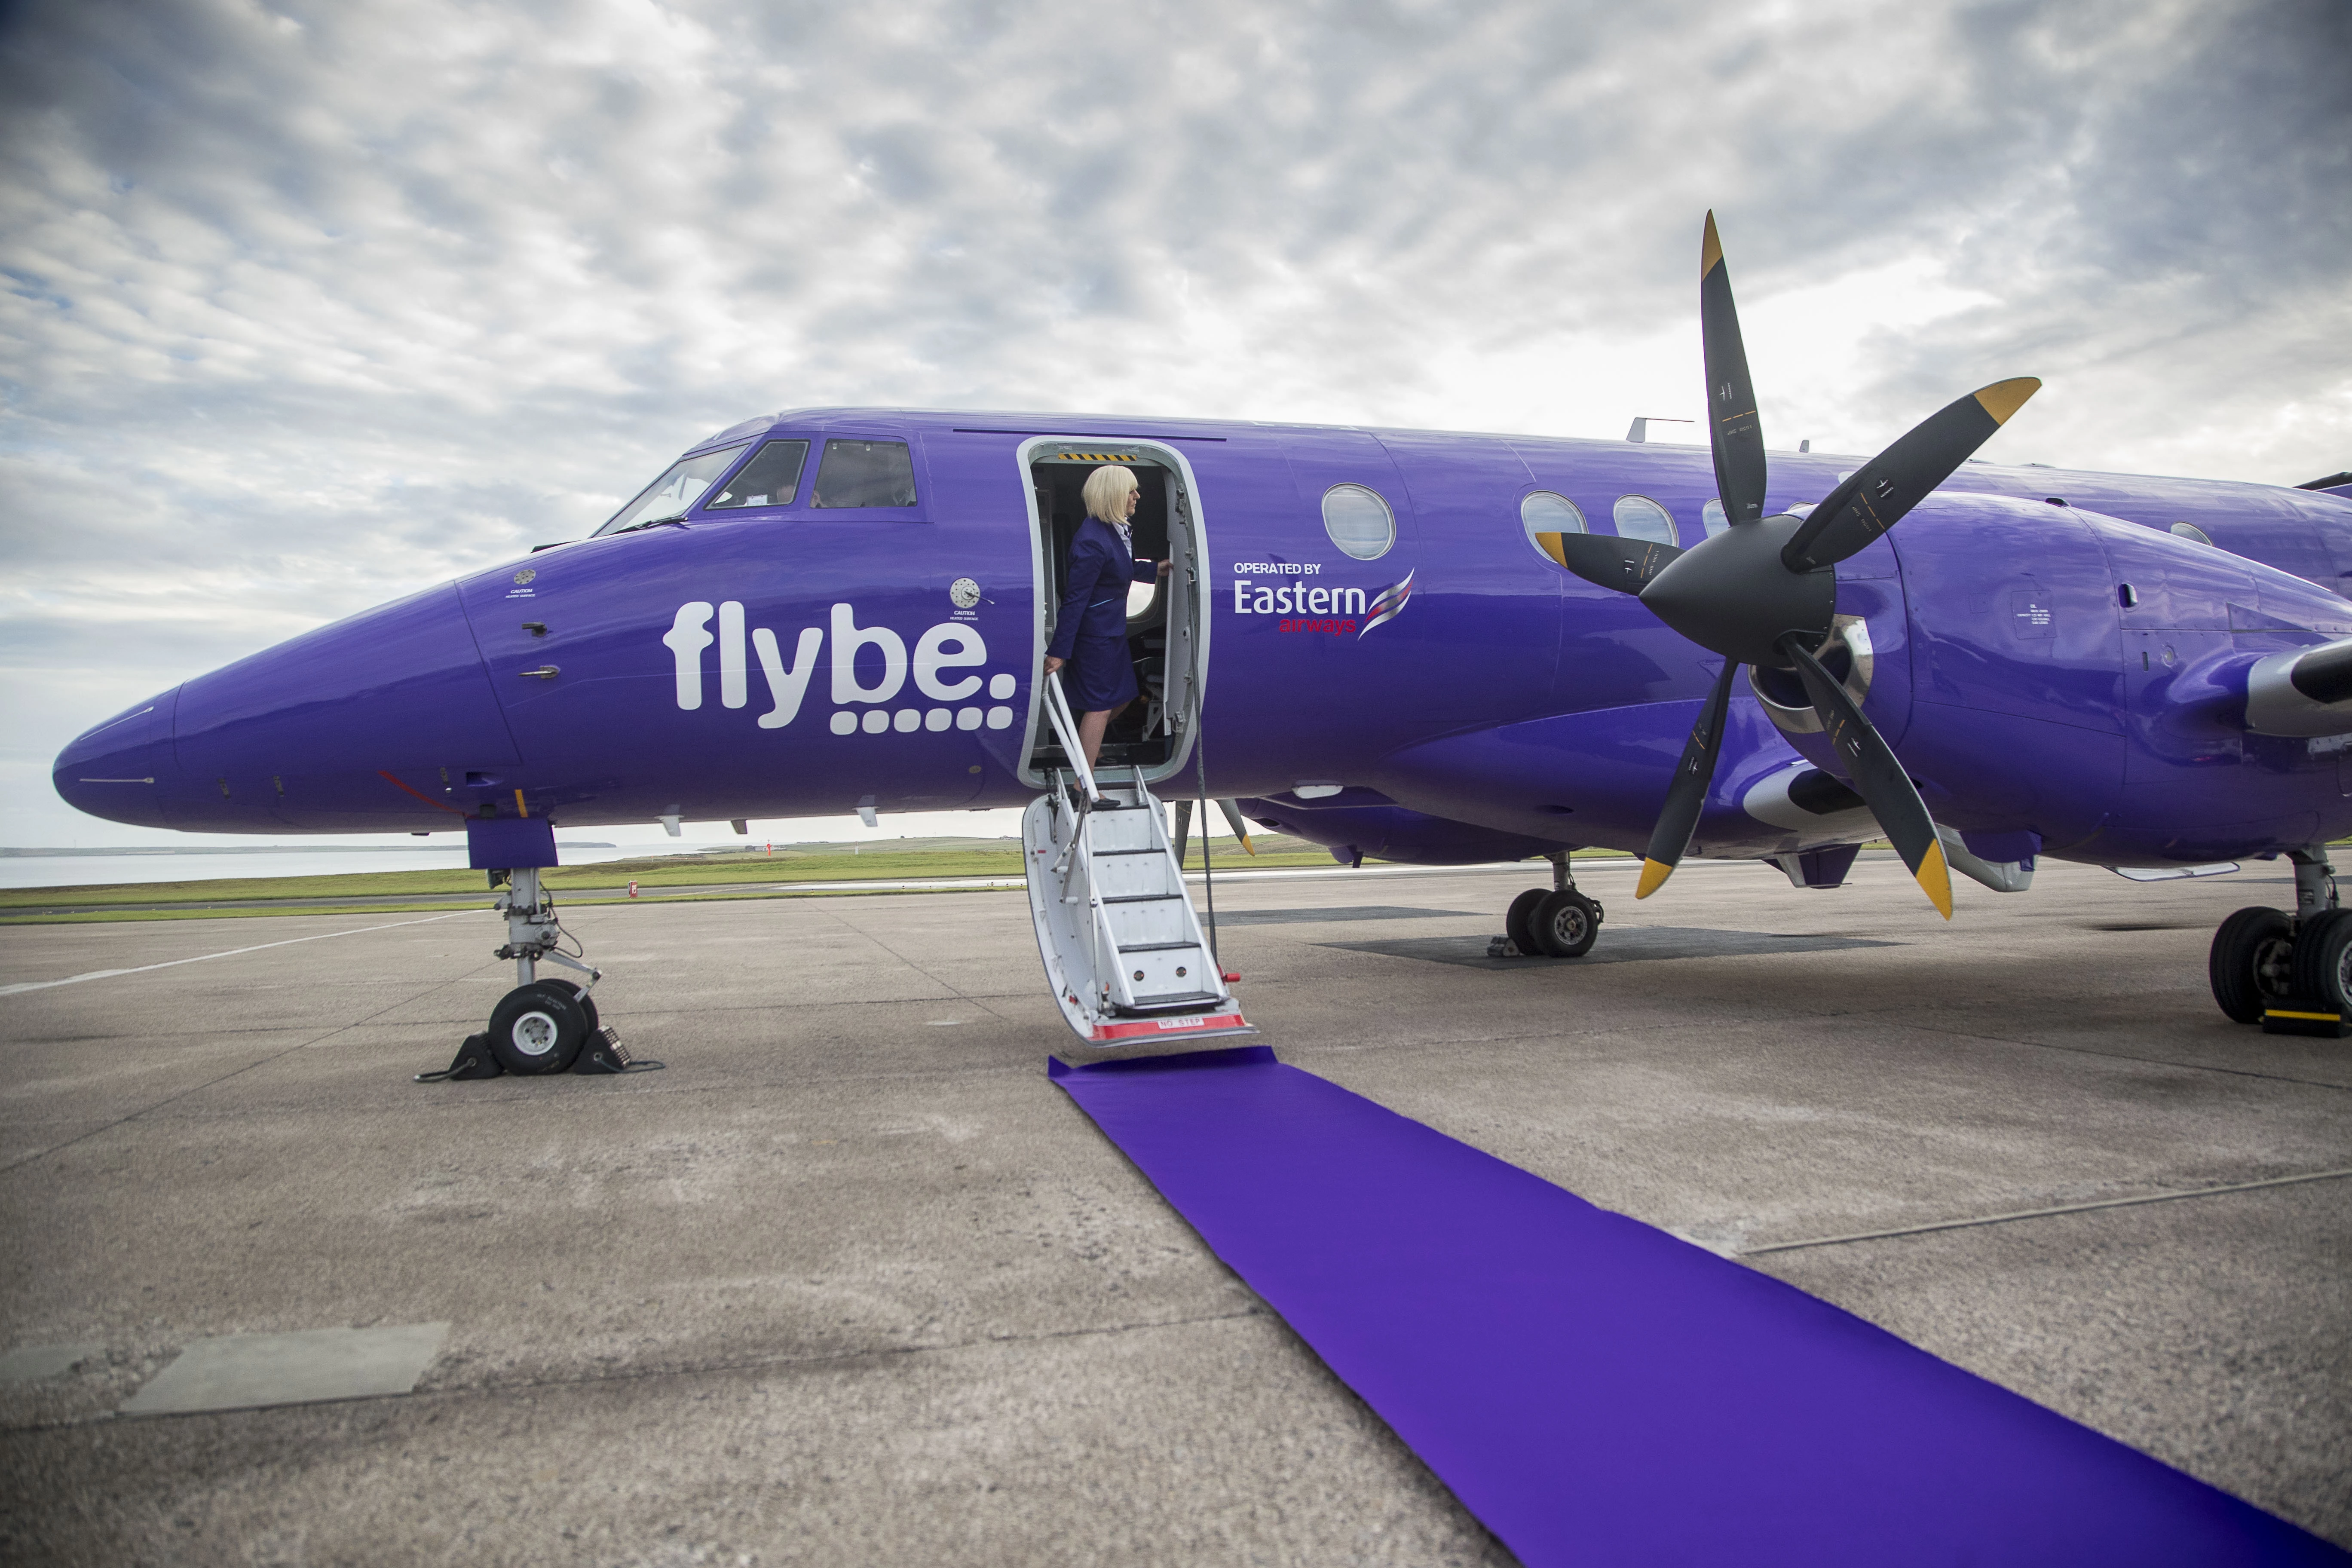 The airline is a franchise partner of Flybe